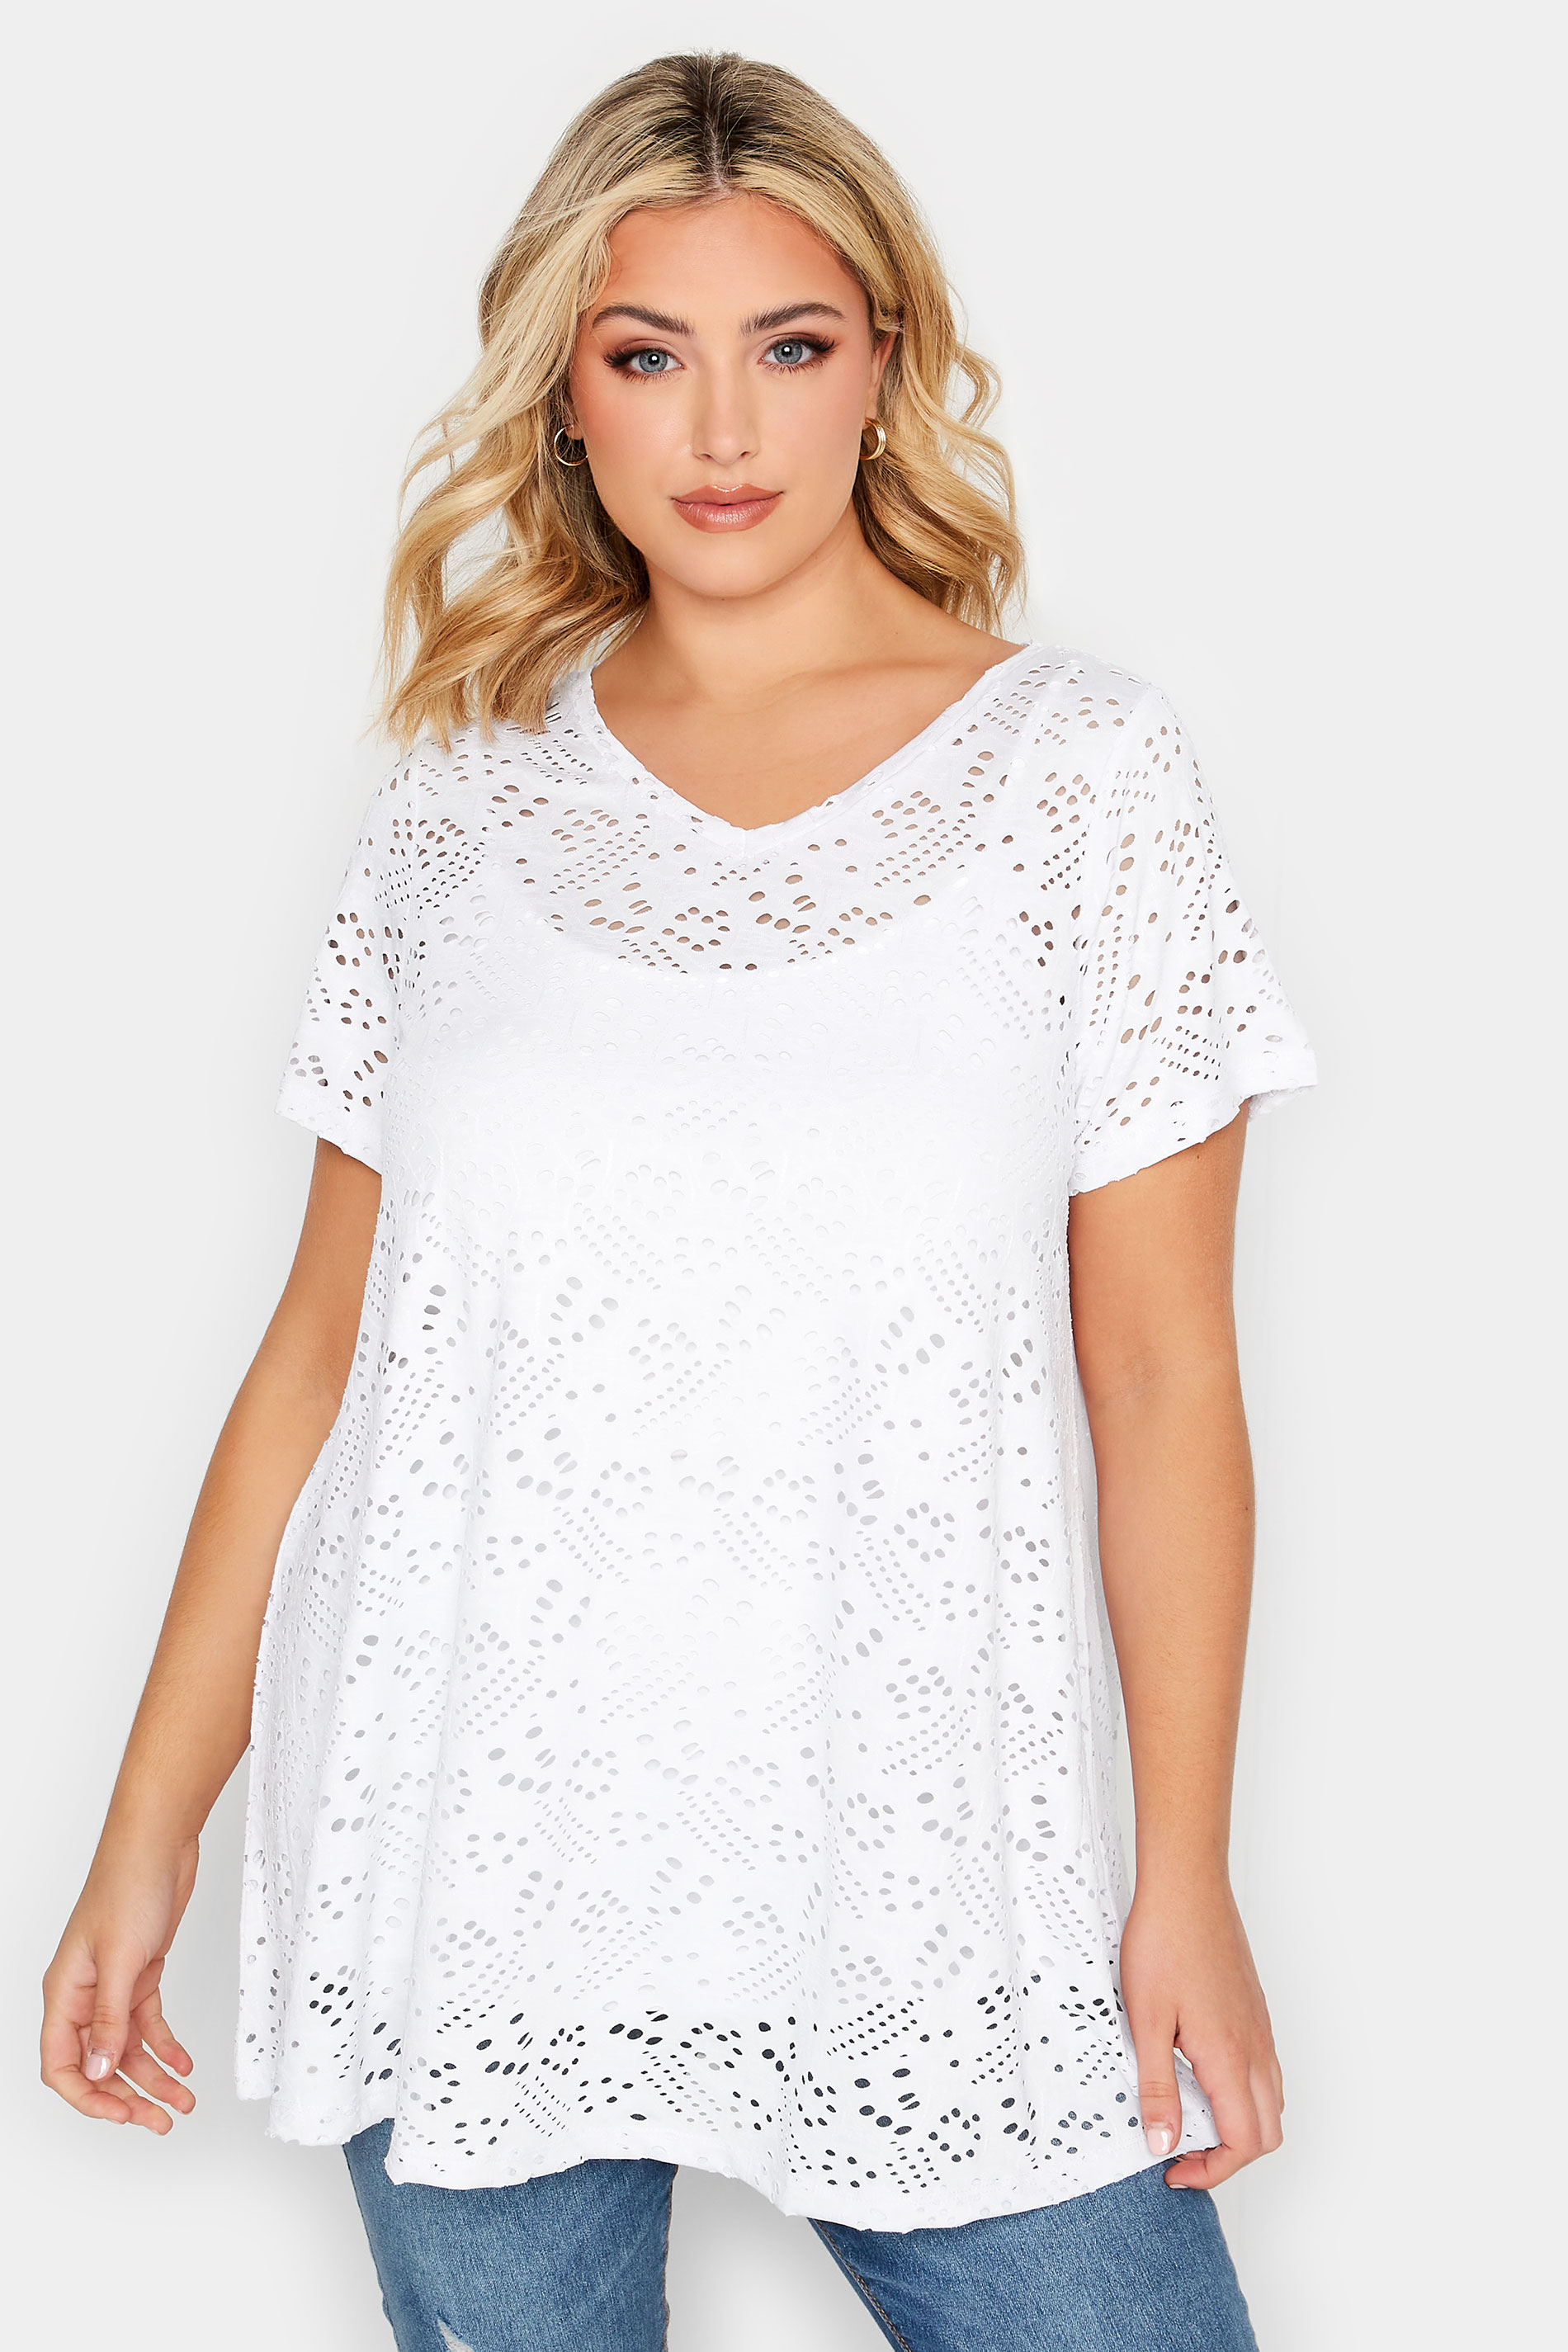 YOURS Curve Plus Size 2 PACK White & Black Broderie Anglaise Swing V-Neck T-Shirt | Yours Clothing  2